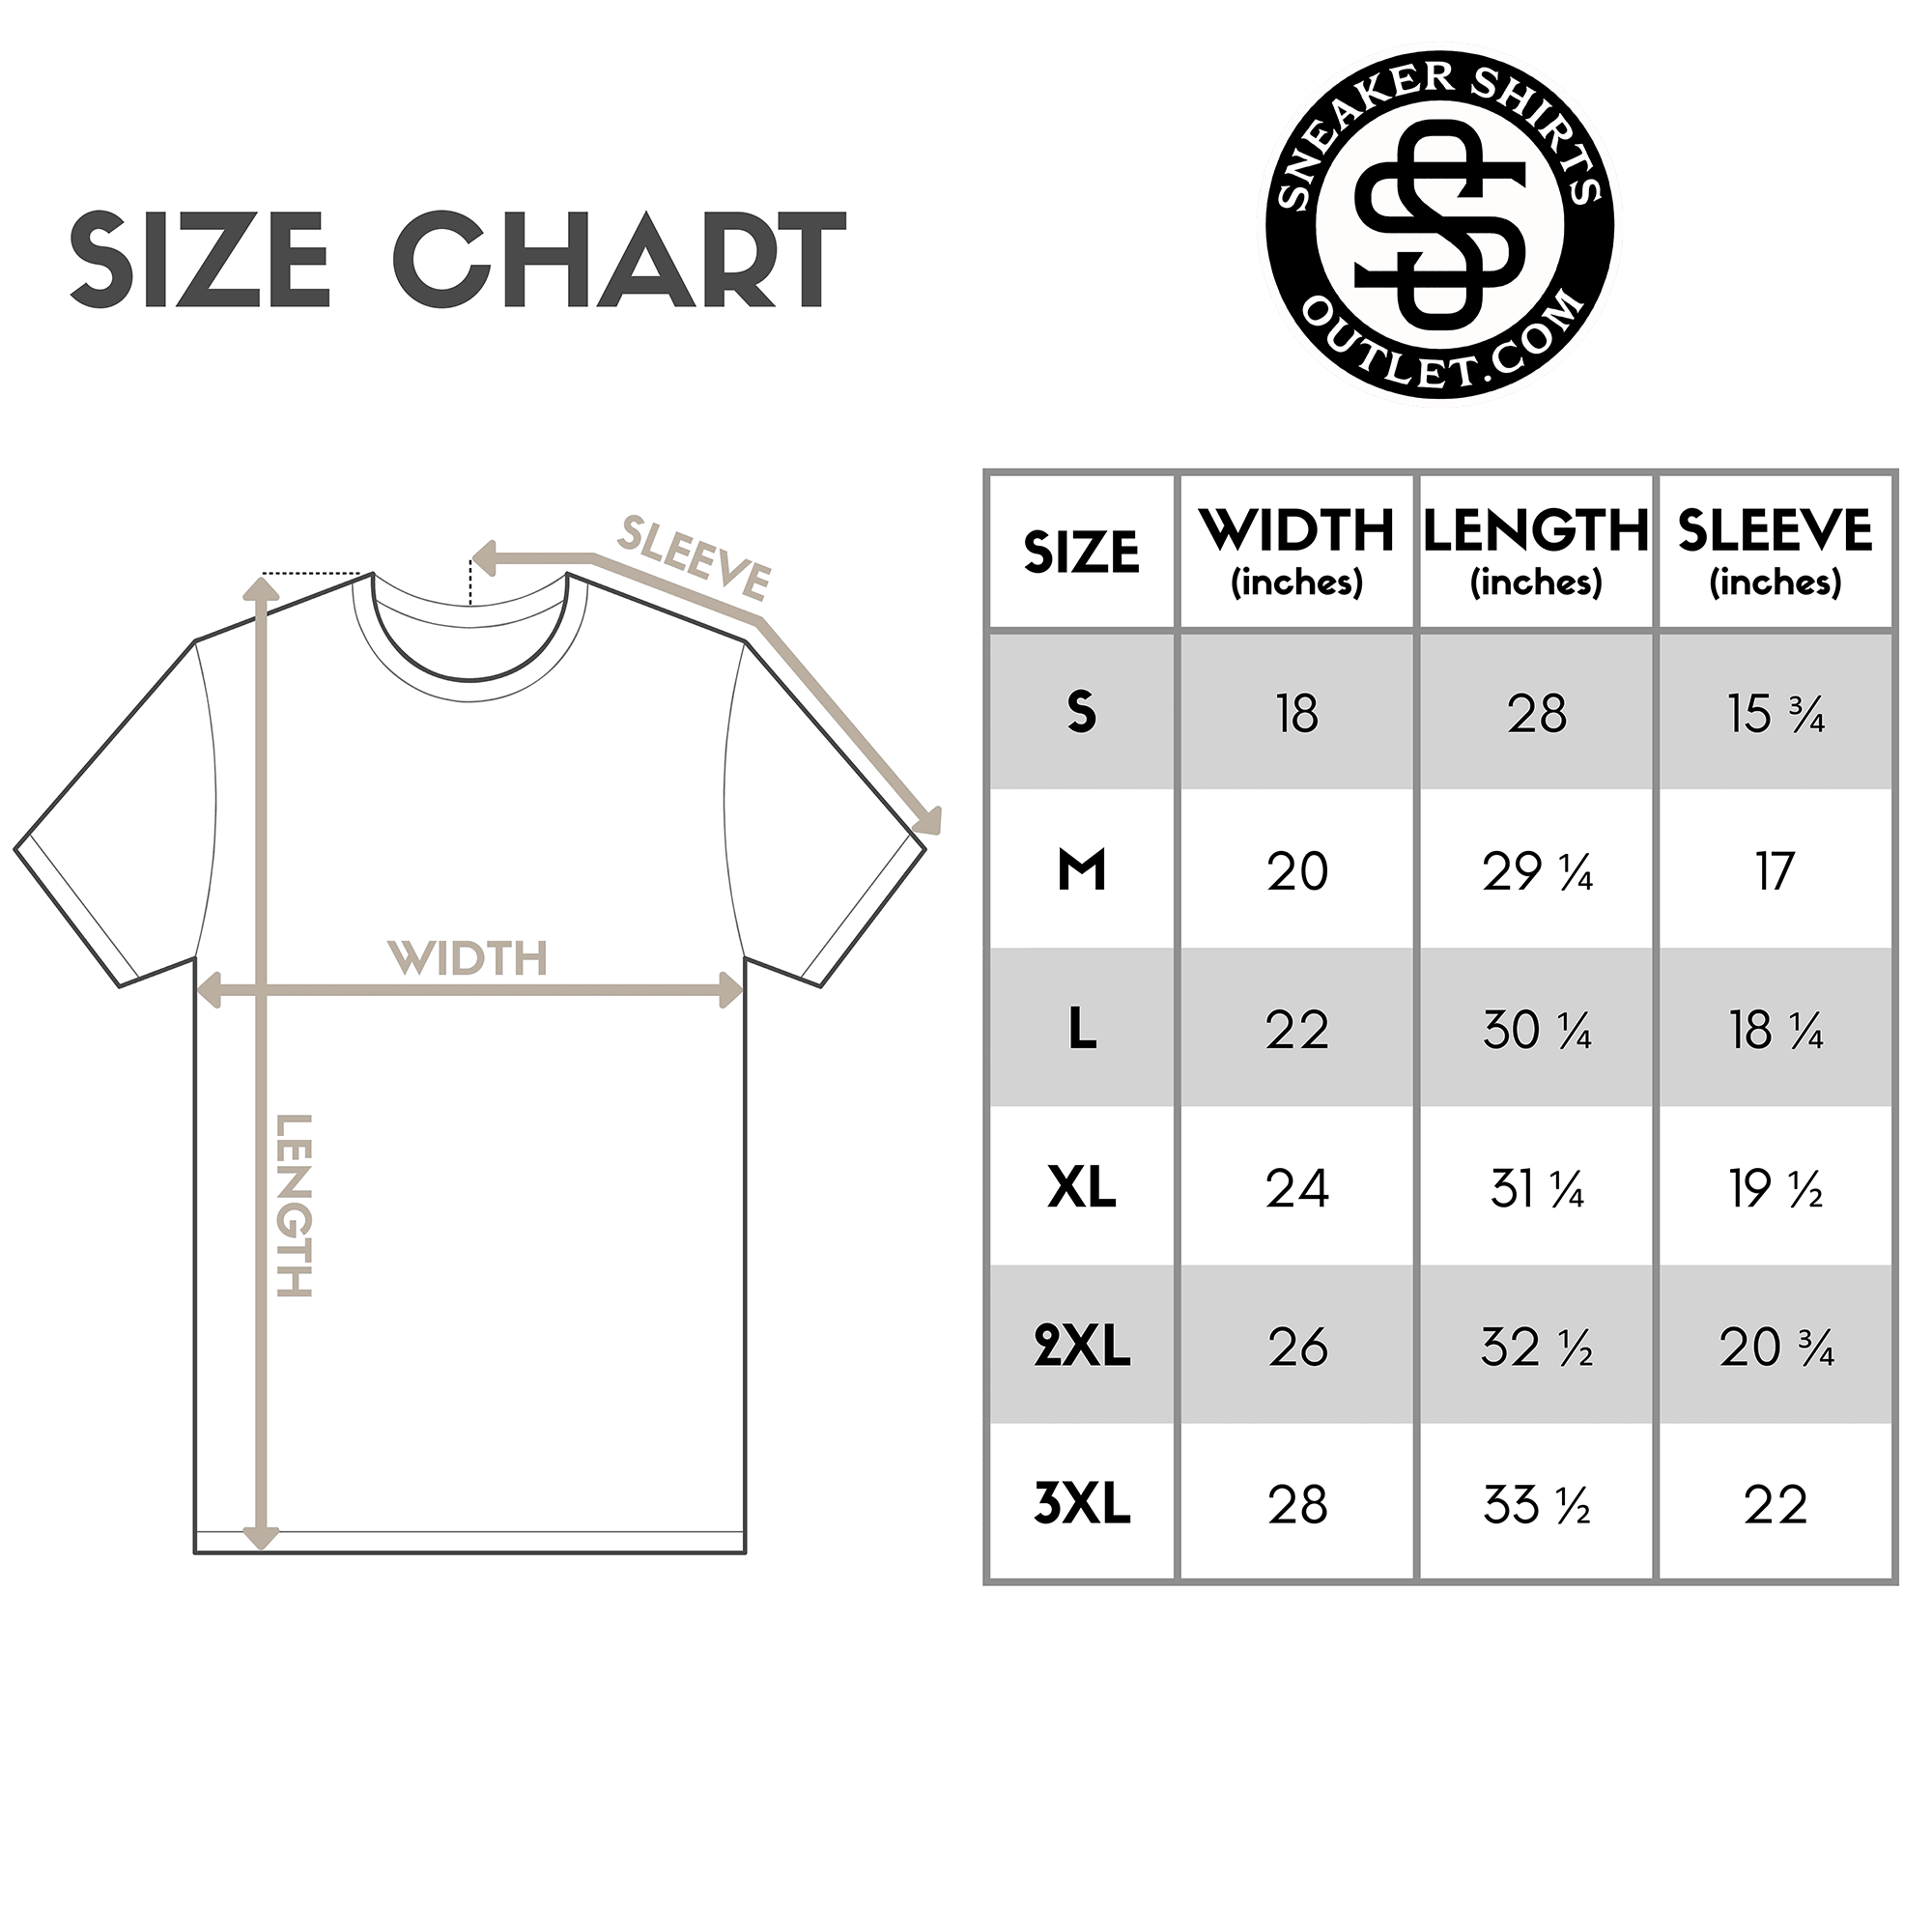 size chart Blessed Shirt Yeezy Boost 700 Bright Blue photo